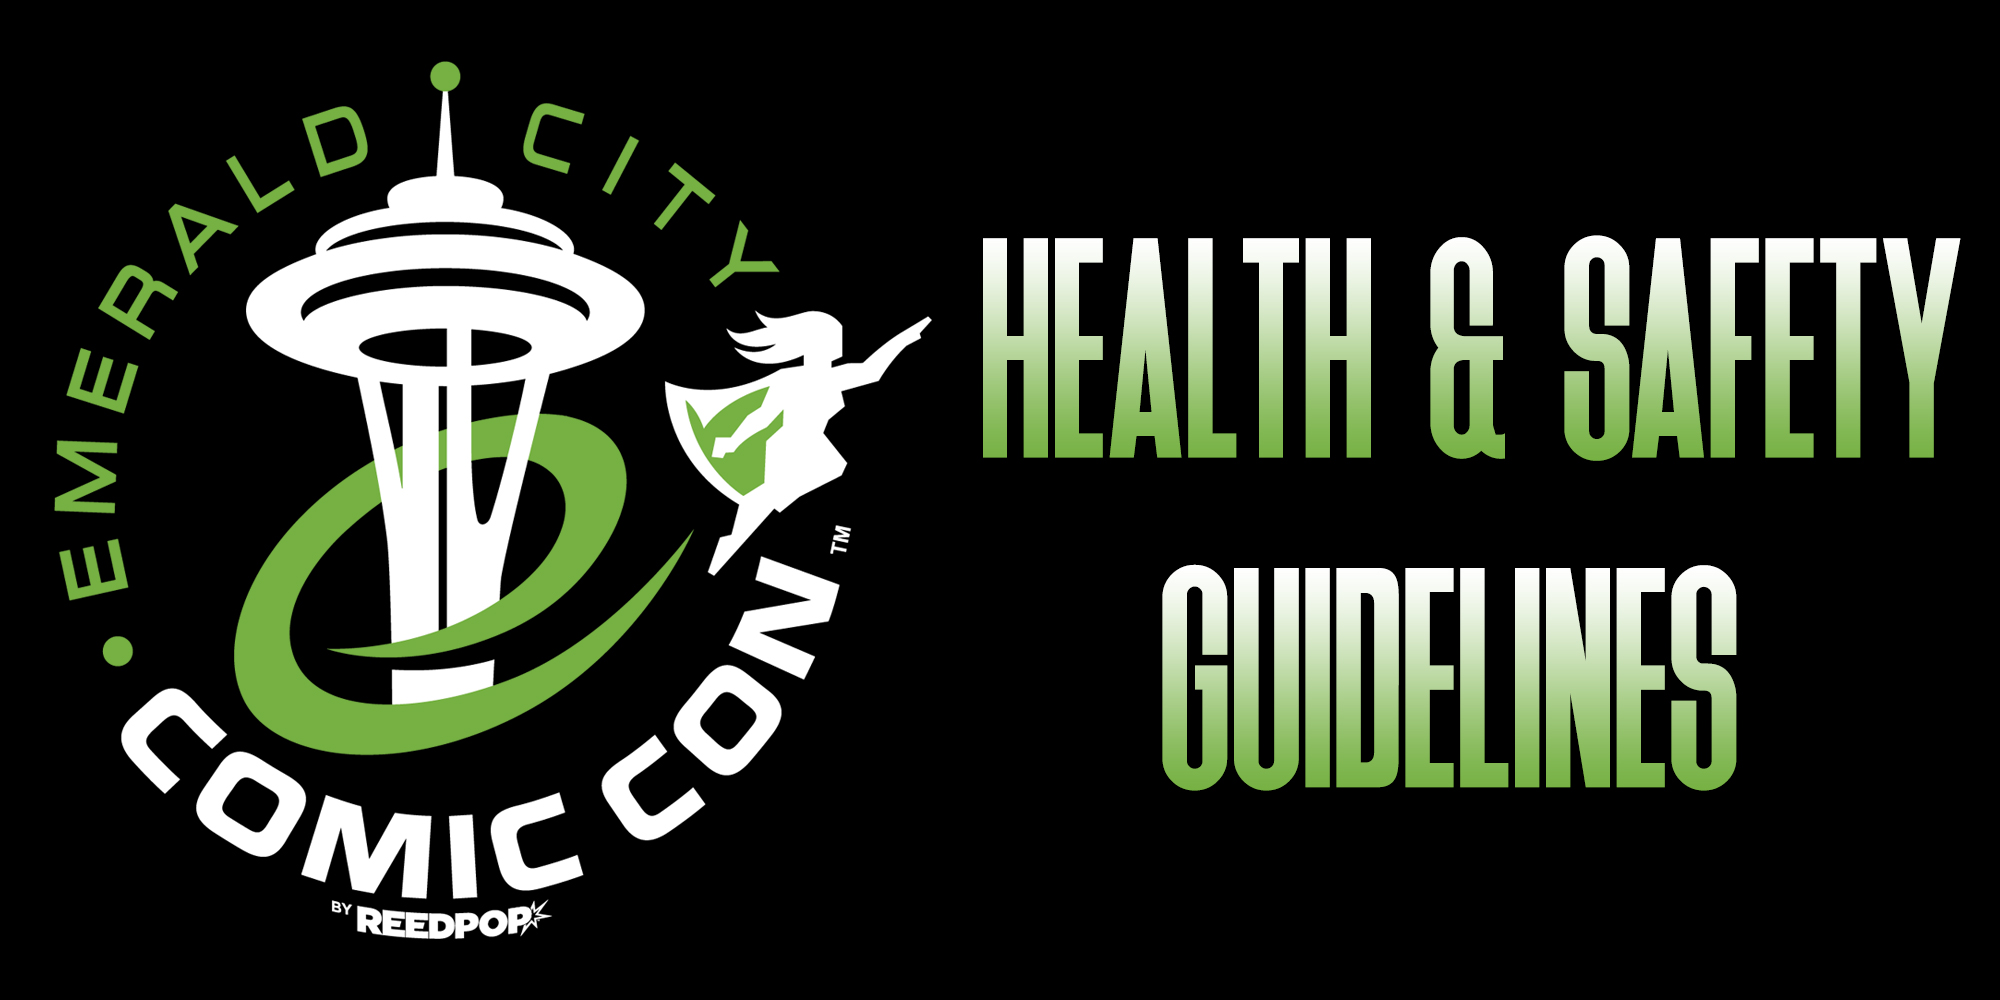 ECCC - Health And Safety Guidelines Announced